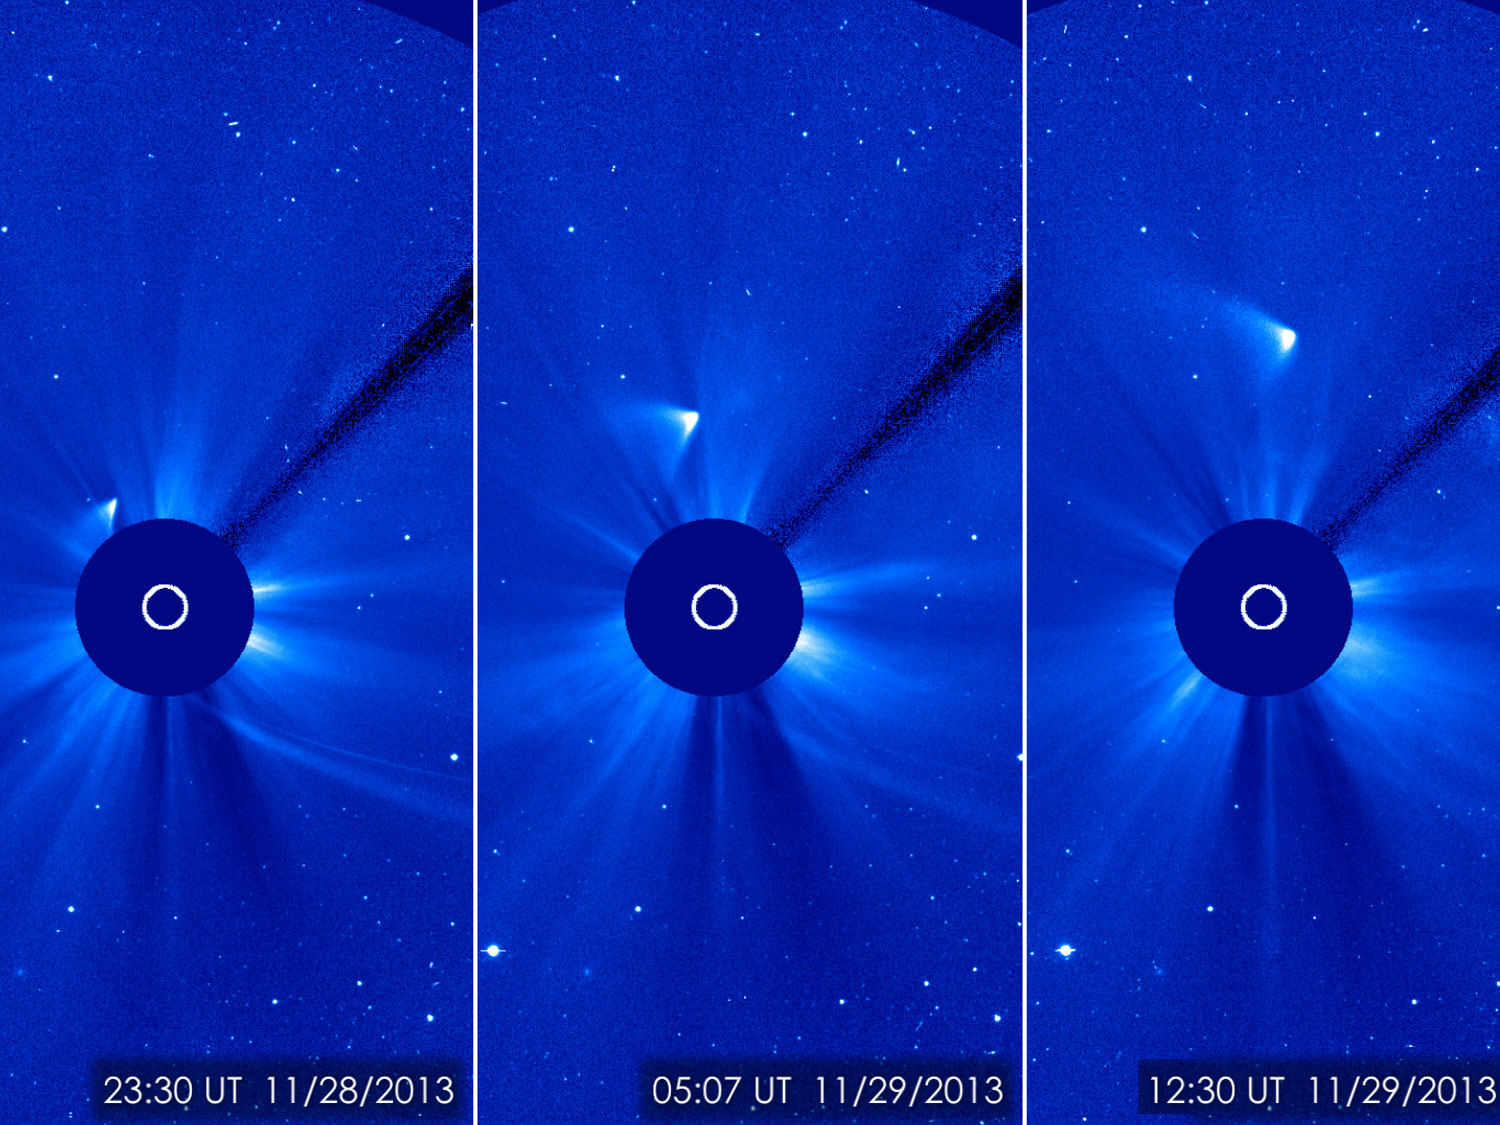 The remains of Comet Ison, as photographed by the Soho spacecraft of NASA and the European Space Agency the day after perihelion.